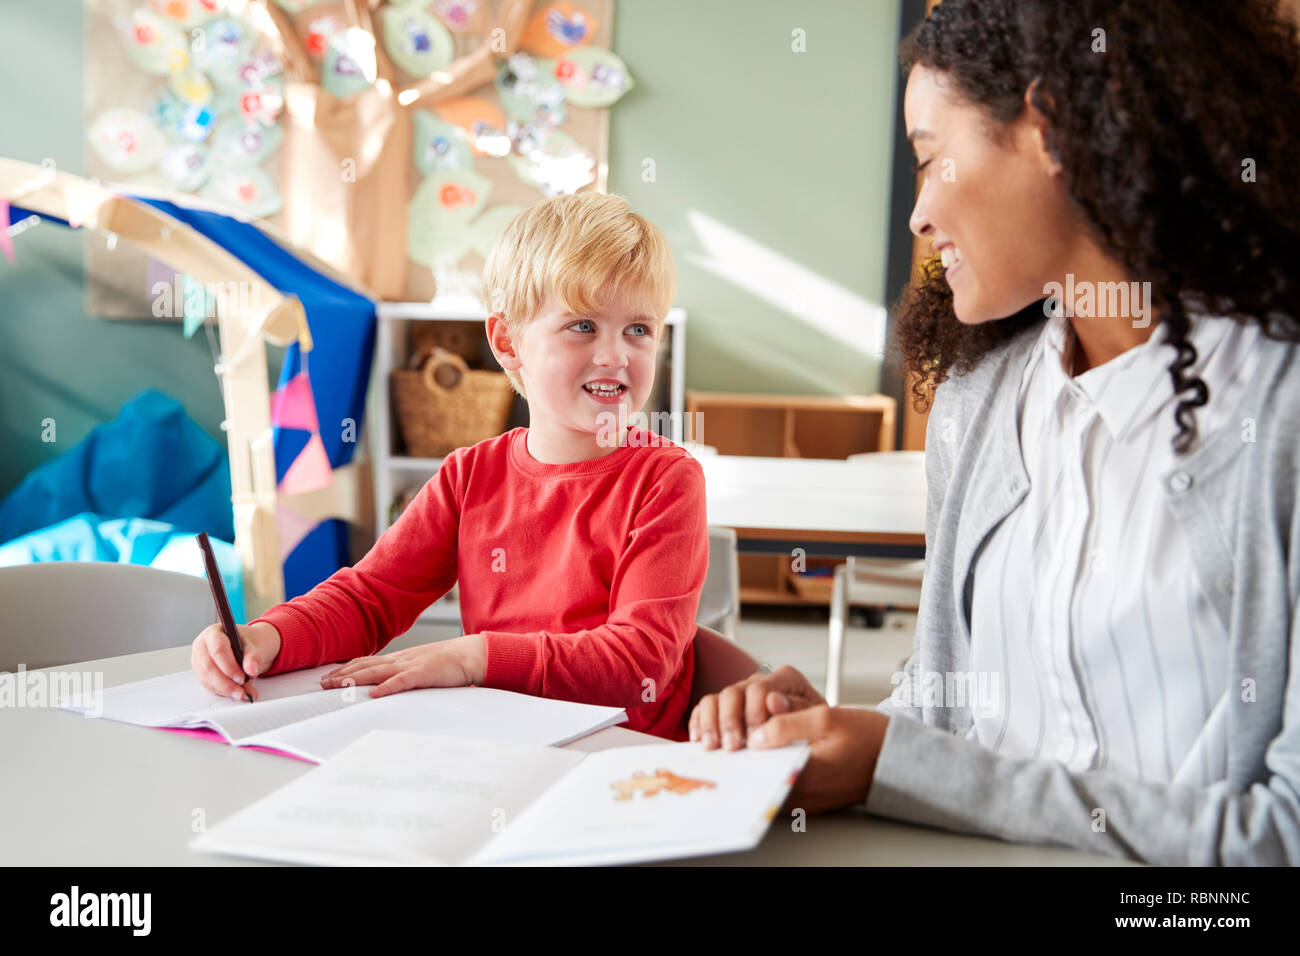 Female infant school teacher working one on one with a young white schoolboy, sitting at a table in a classroom writing, looking at each other, close up Stock Photo